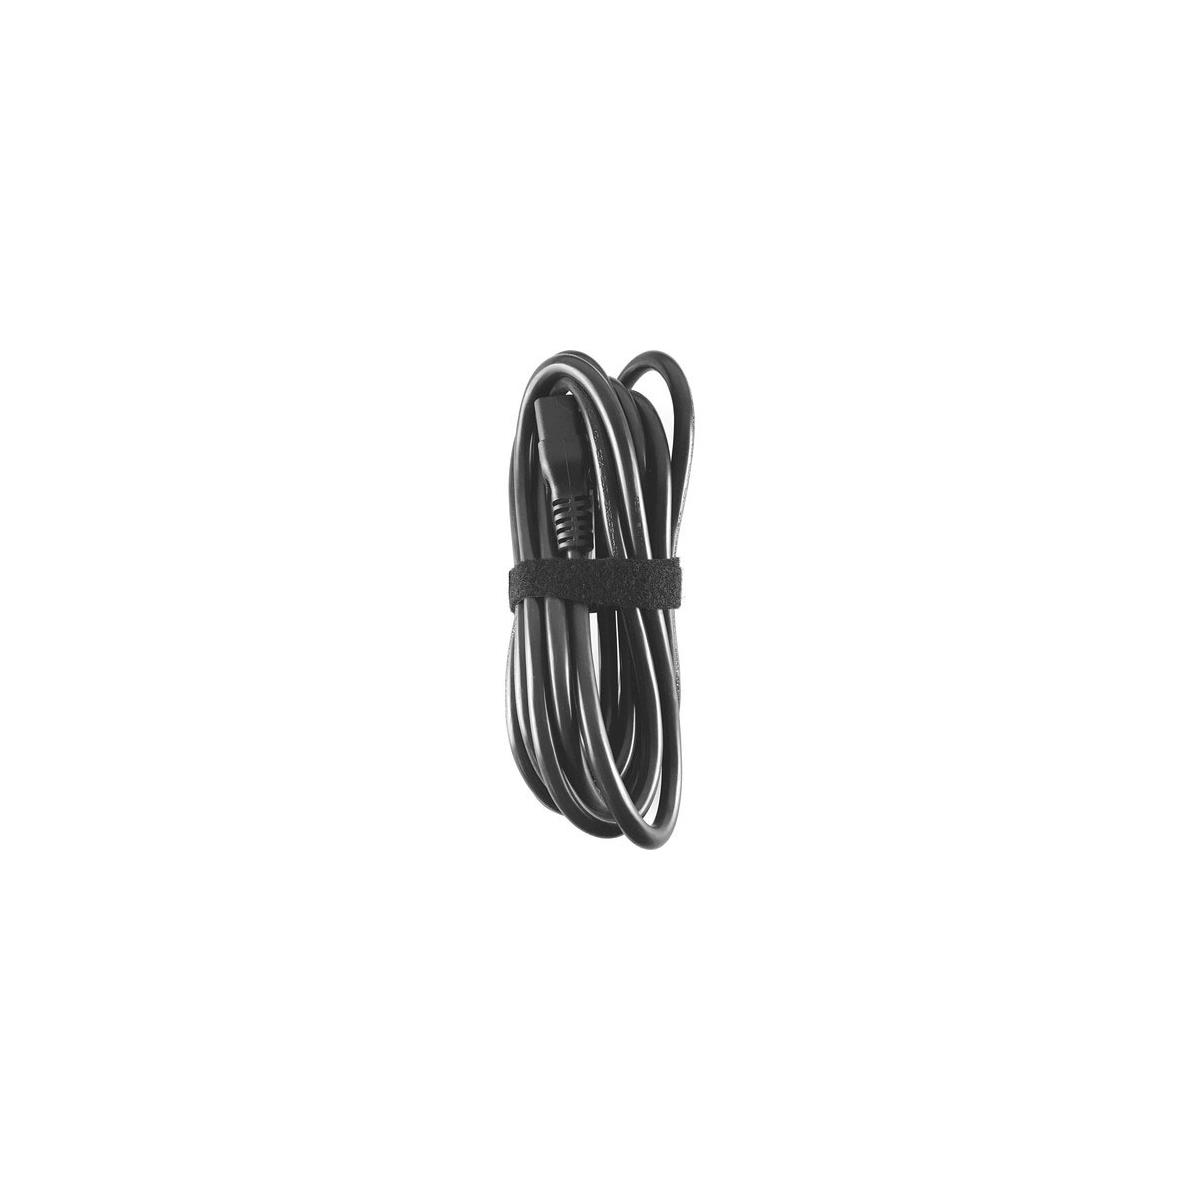 Image of Profoto 16.4' Power Cable for Pro-10/Pro-8/Pro-7/D4 Power Packs